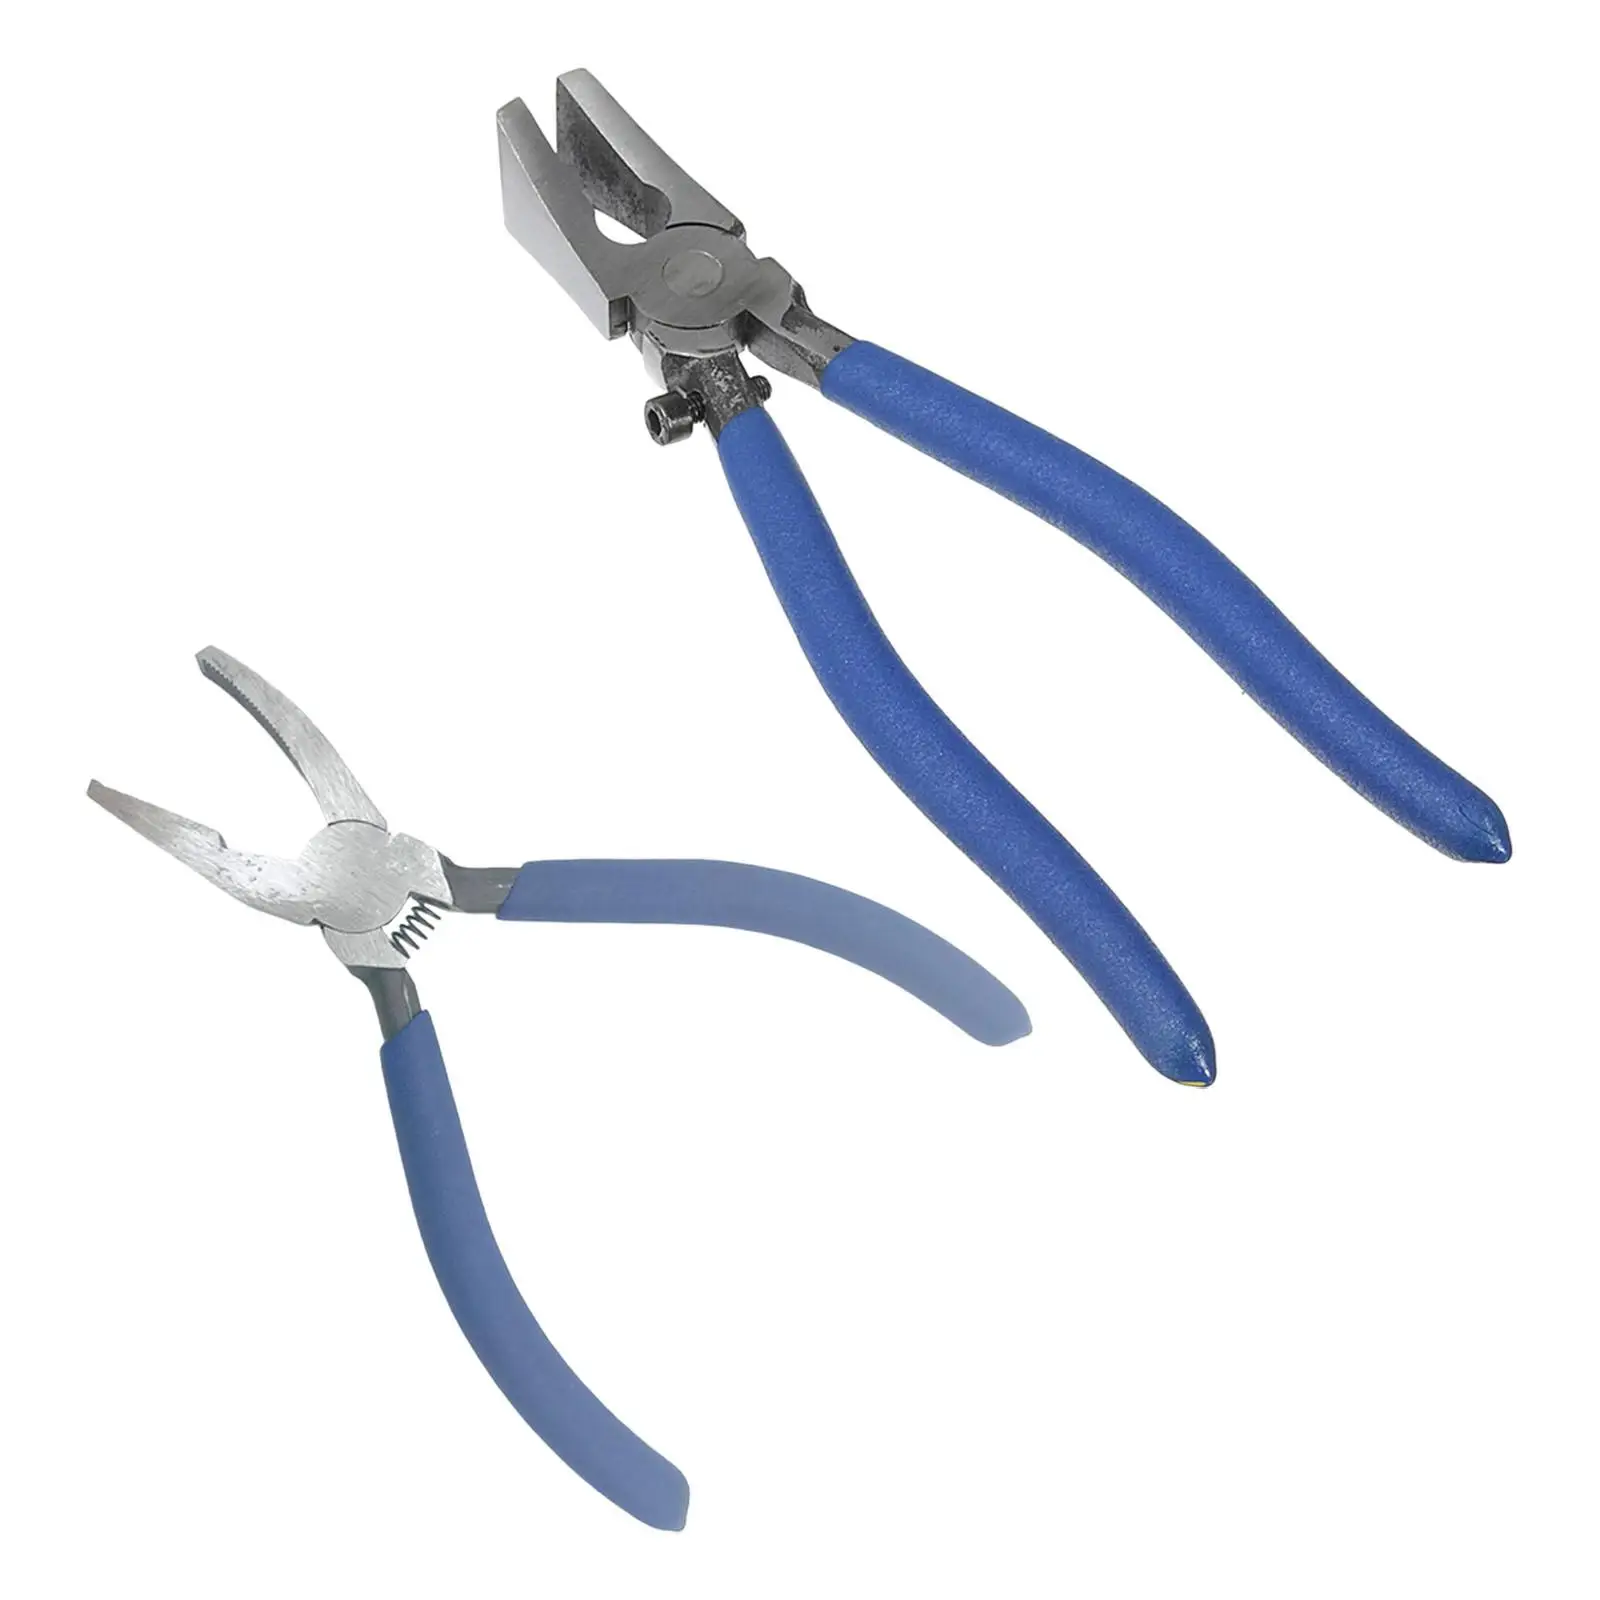 Carbon Steel Key Fob Plier, Breaking Trimming Tool flat Glass Running Pliers with Curved Jaws, for Mosaics Hardware Install